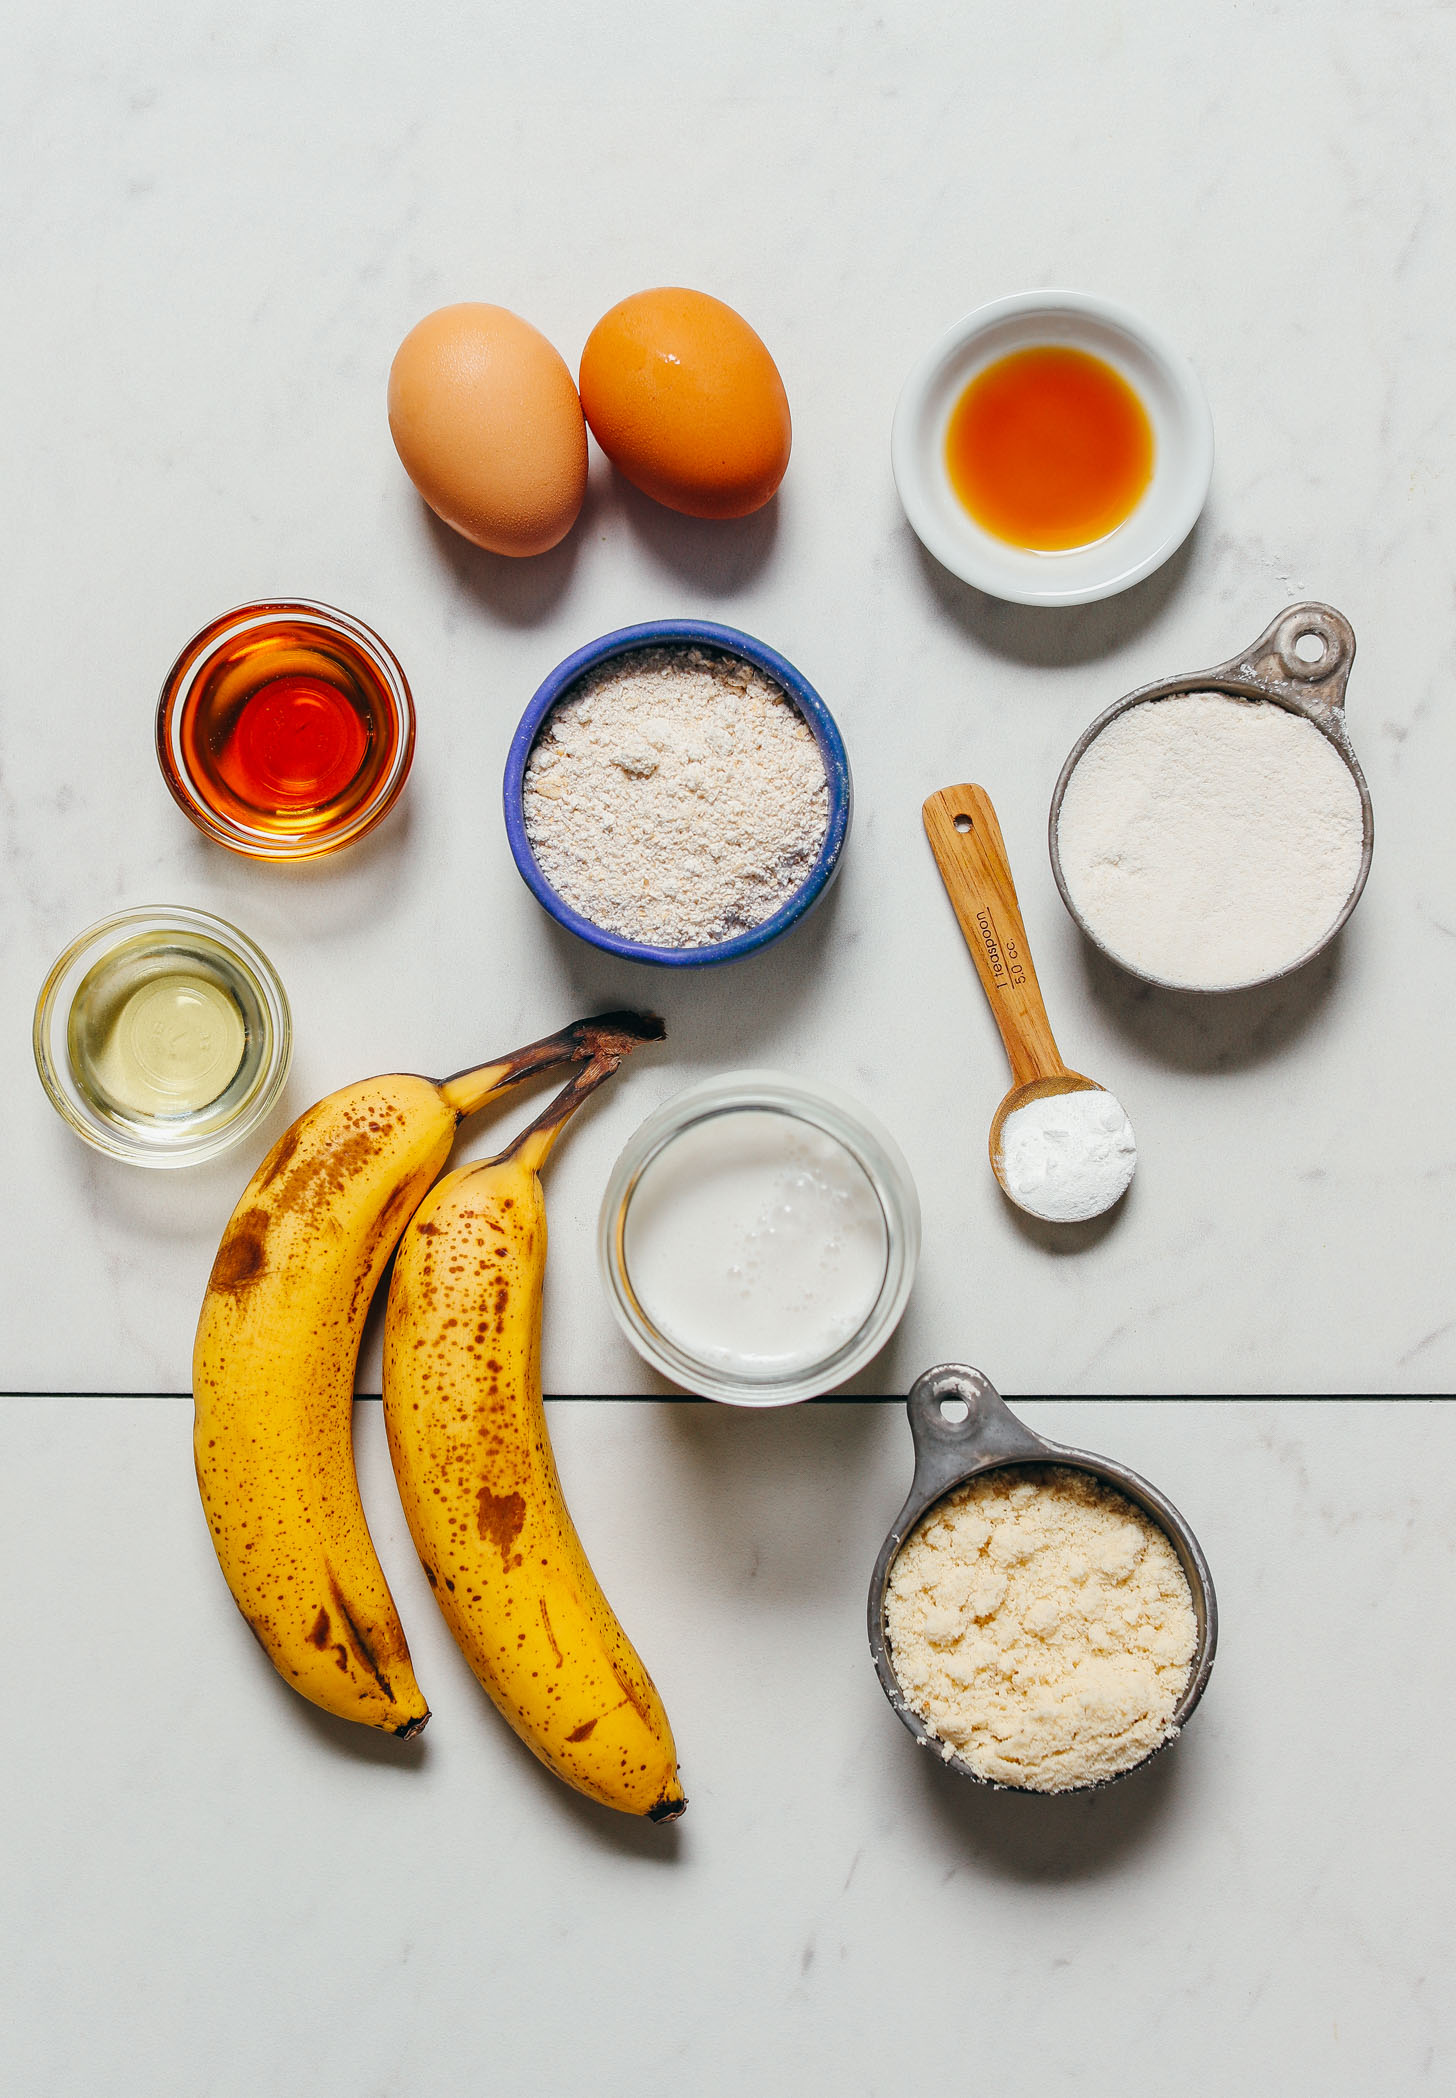 Bananas, almond flour, and other ingredients for making our easy banana pancakes recipe